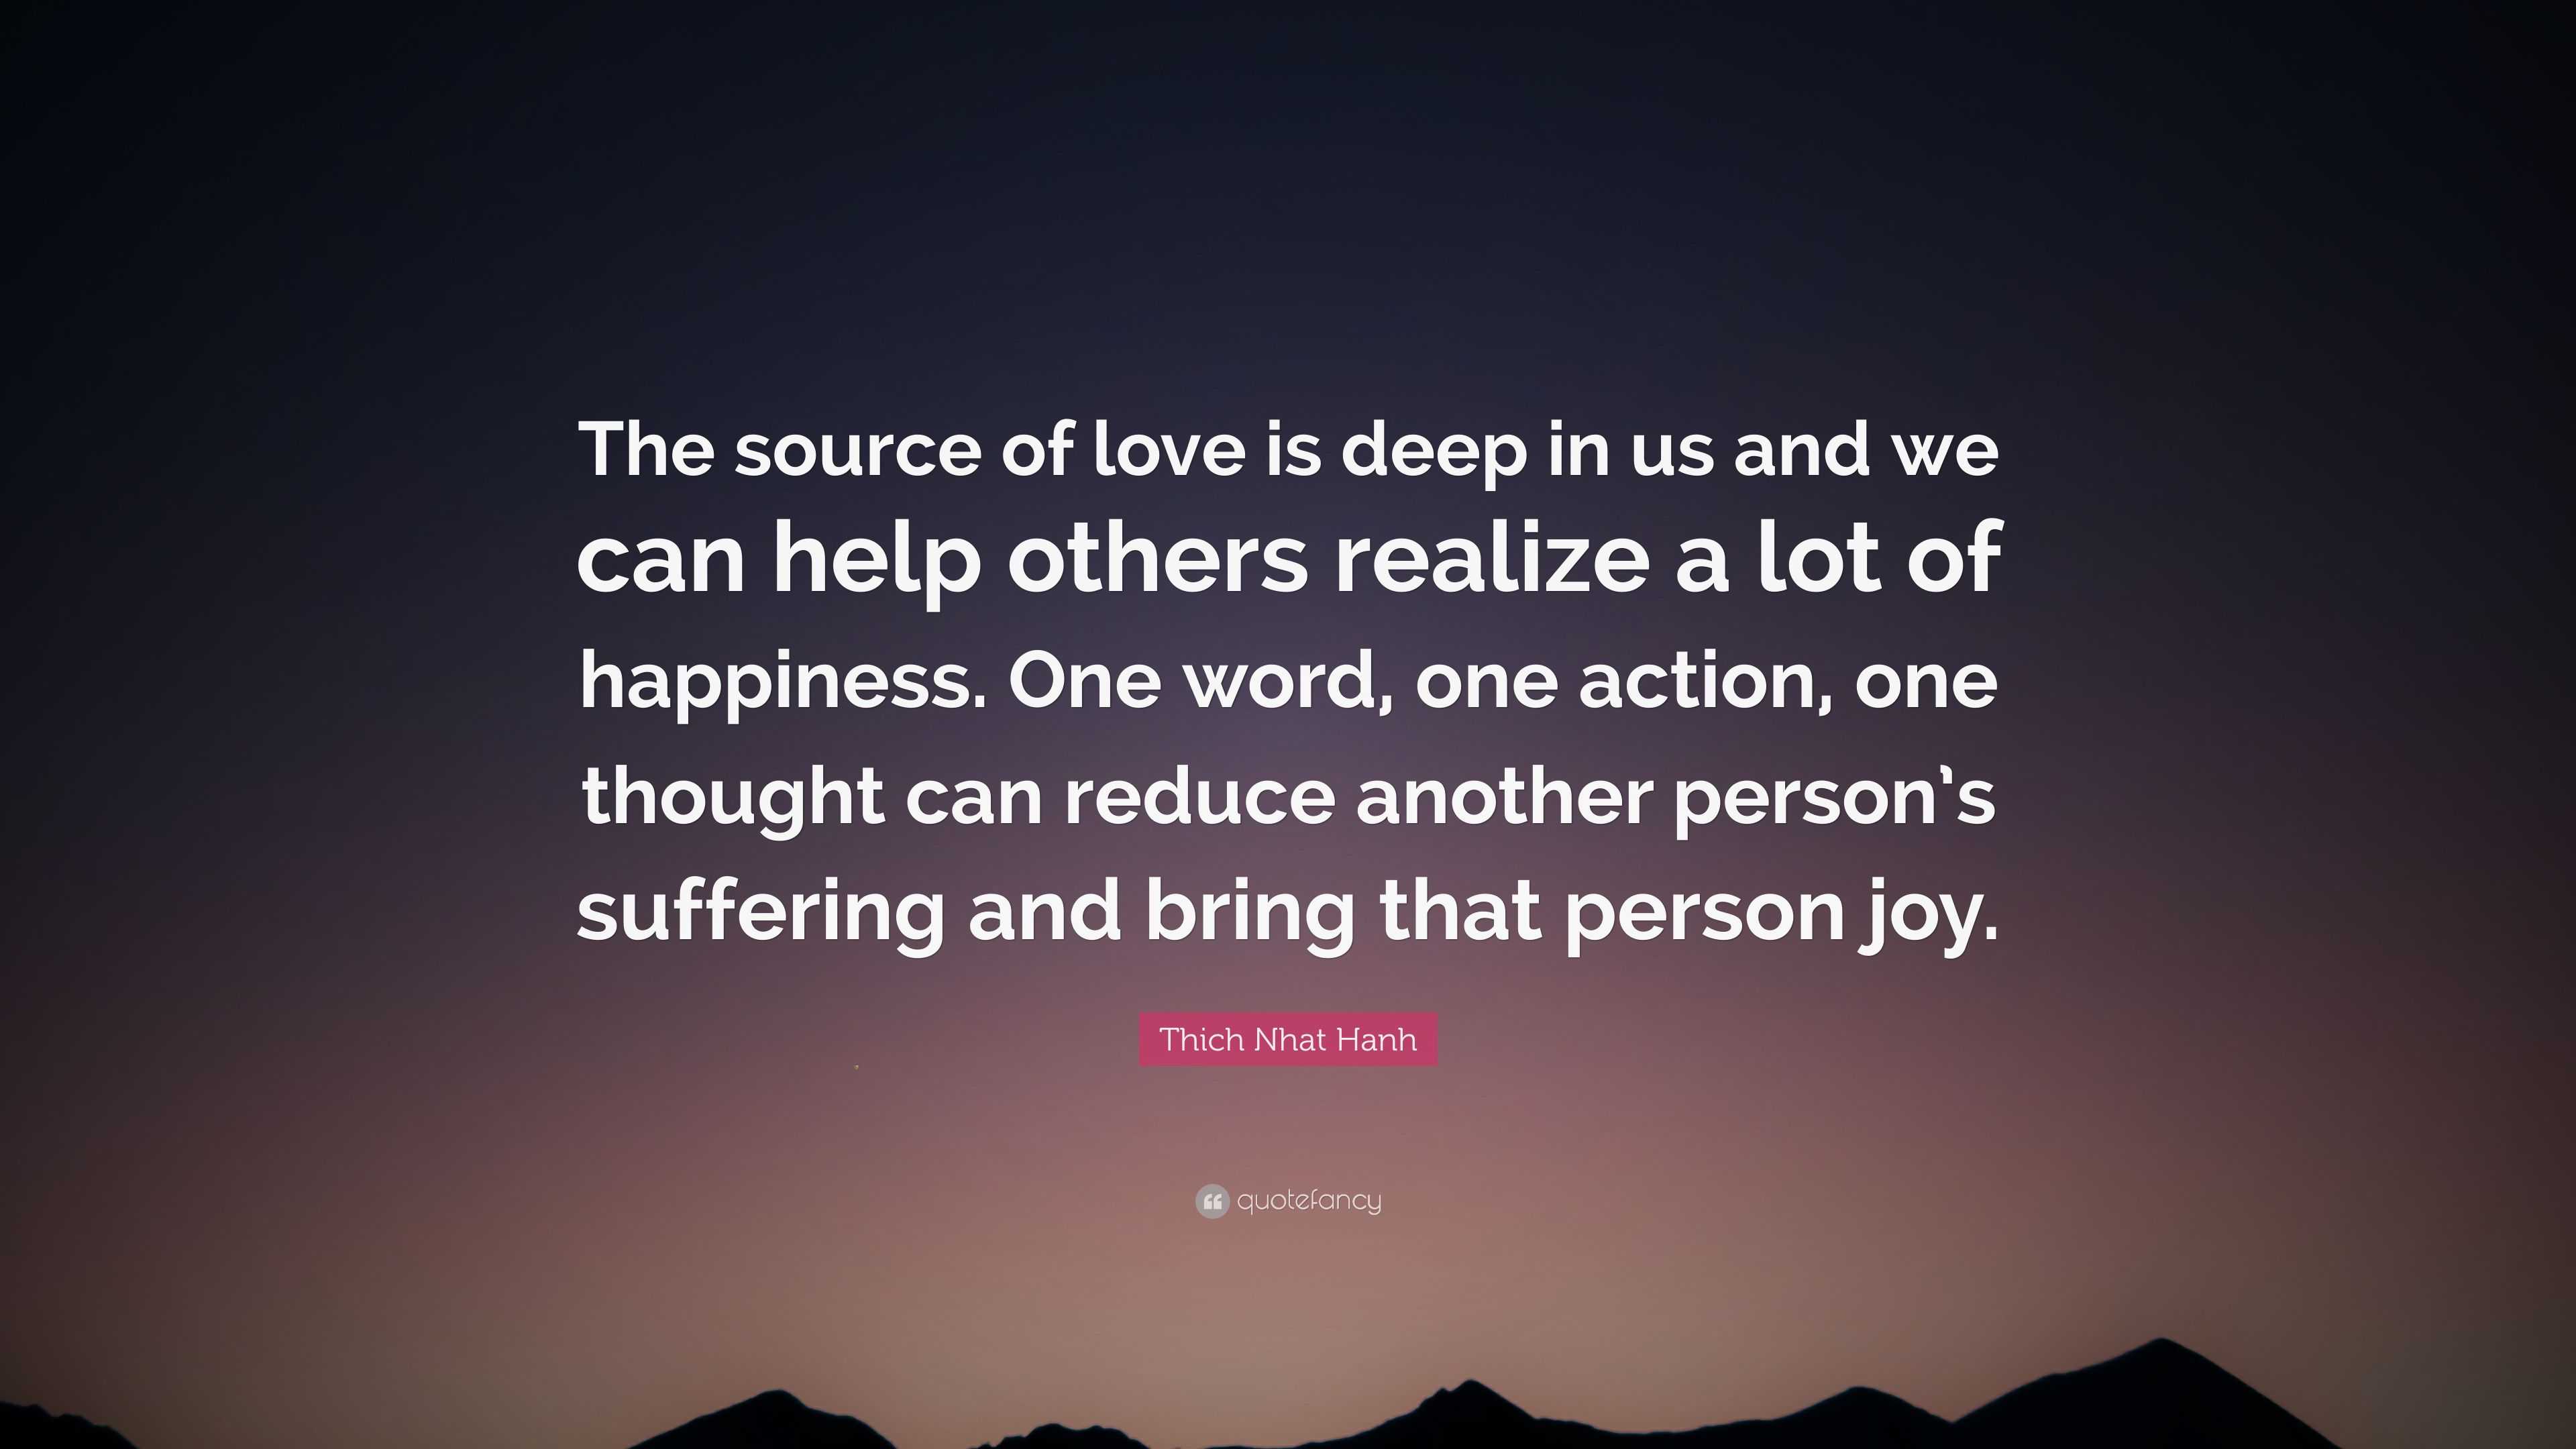 Thich Nhat Hanh Quote: “The source of love is deep in us and we can ...